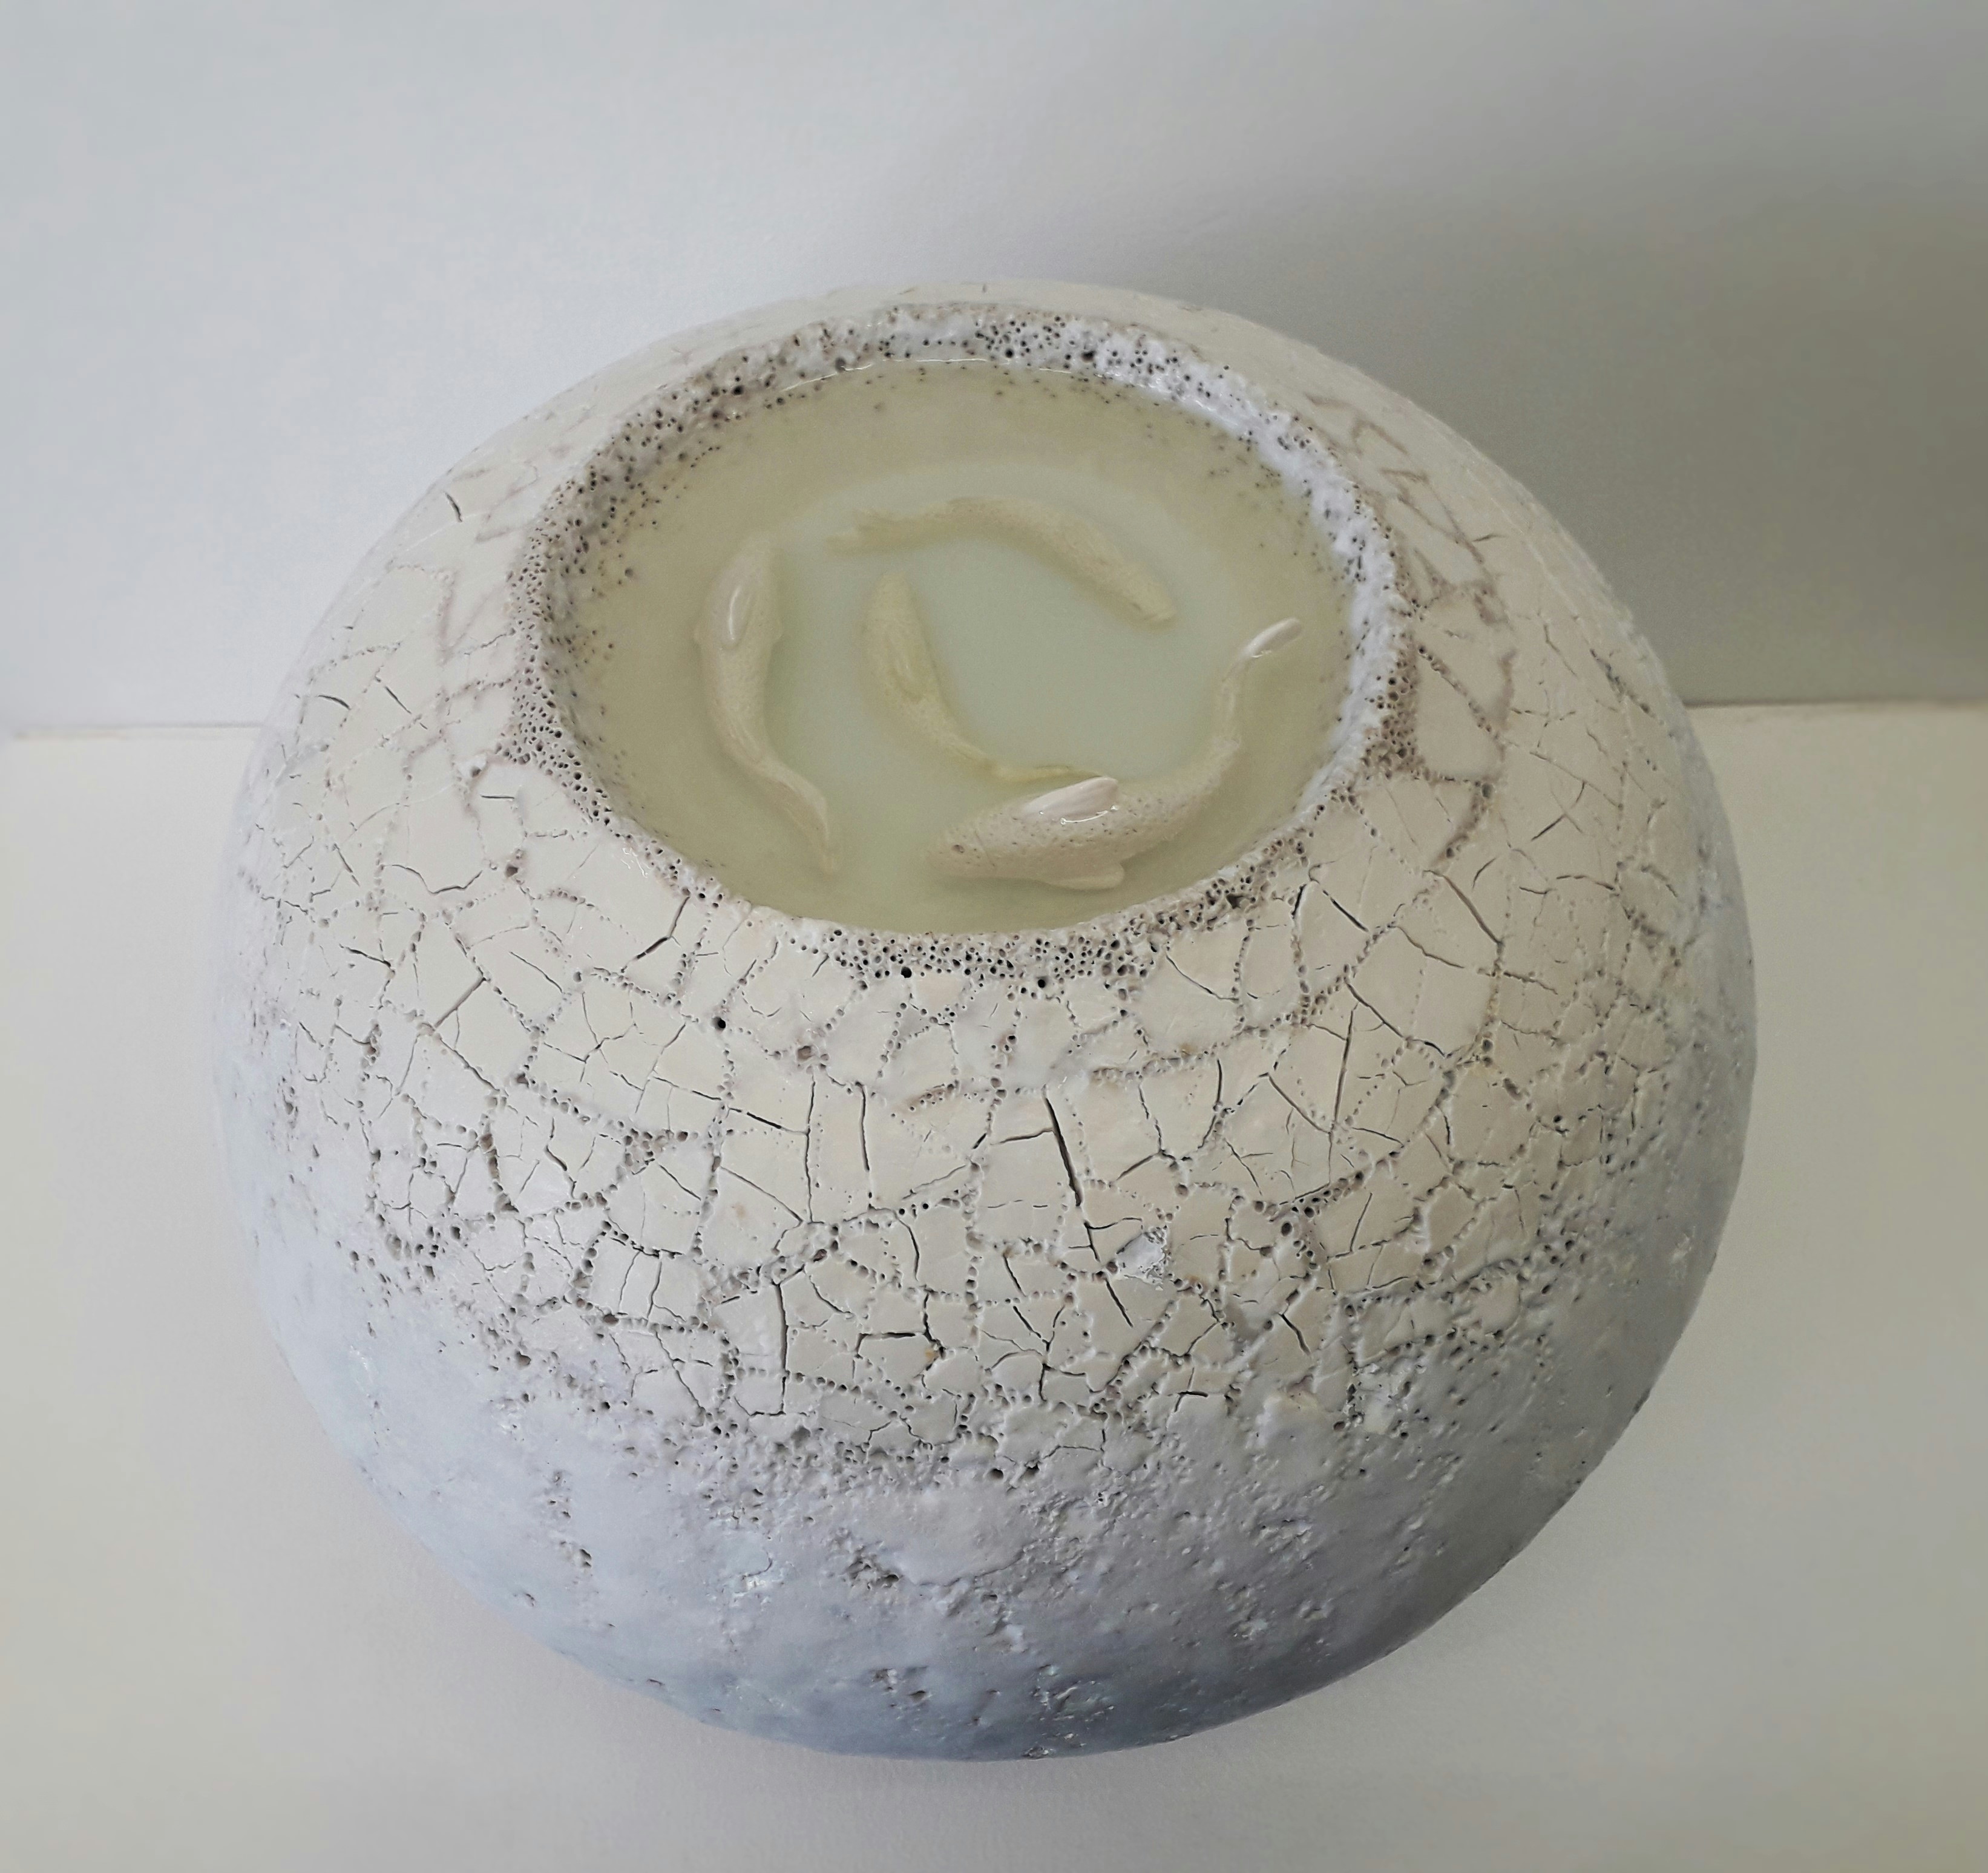 "White fishes", ceramic sculpture like a big snowball with glacier water, cracked ice (porcelain mosaik)